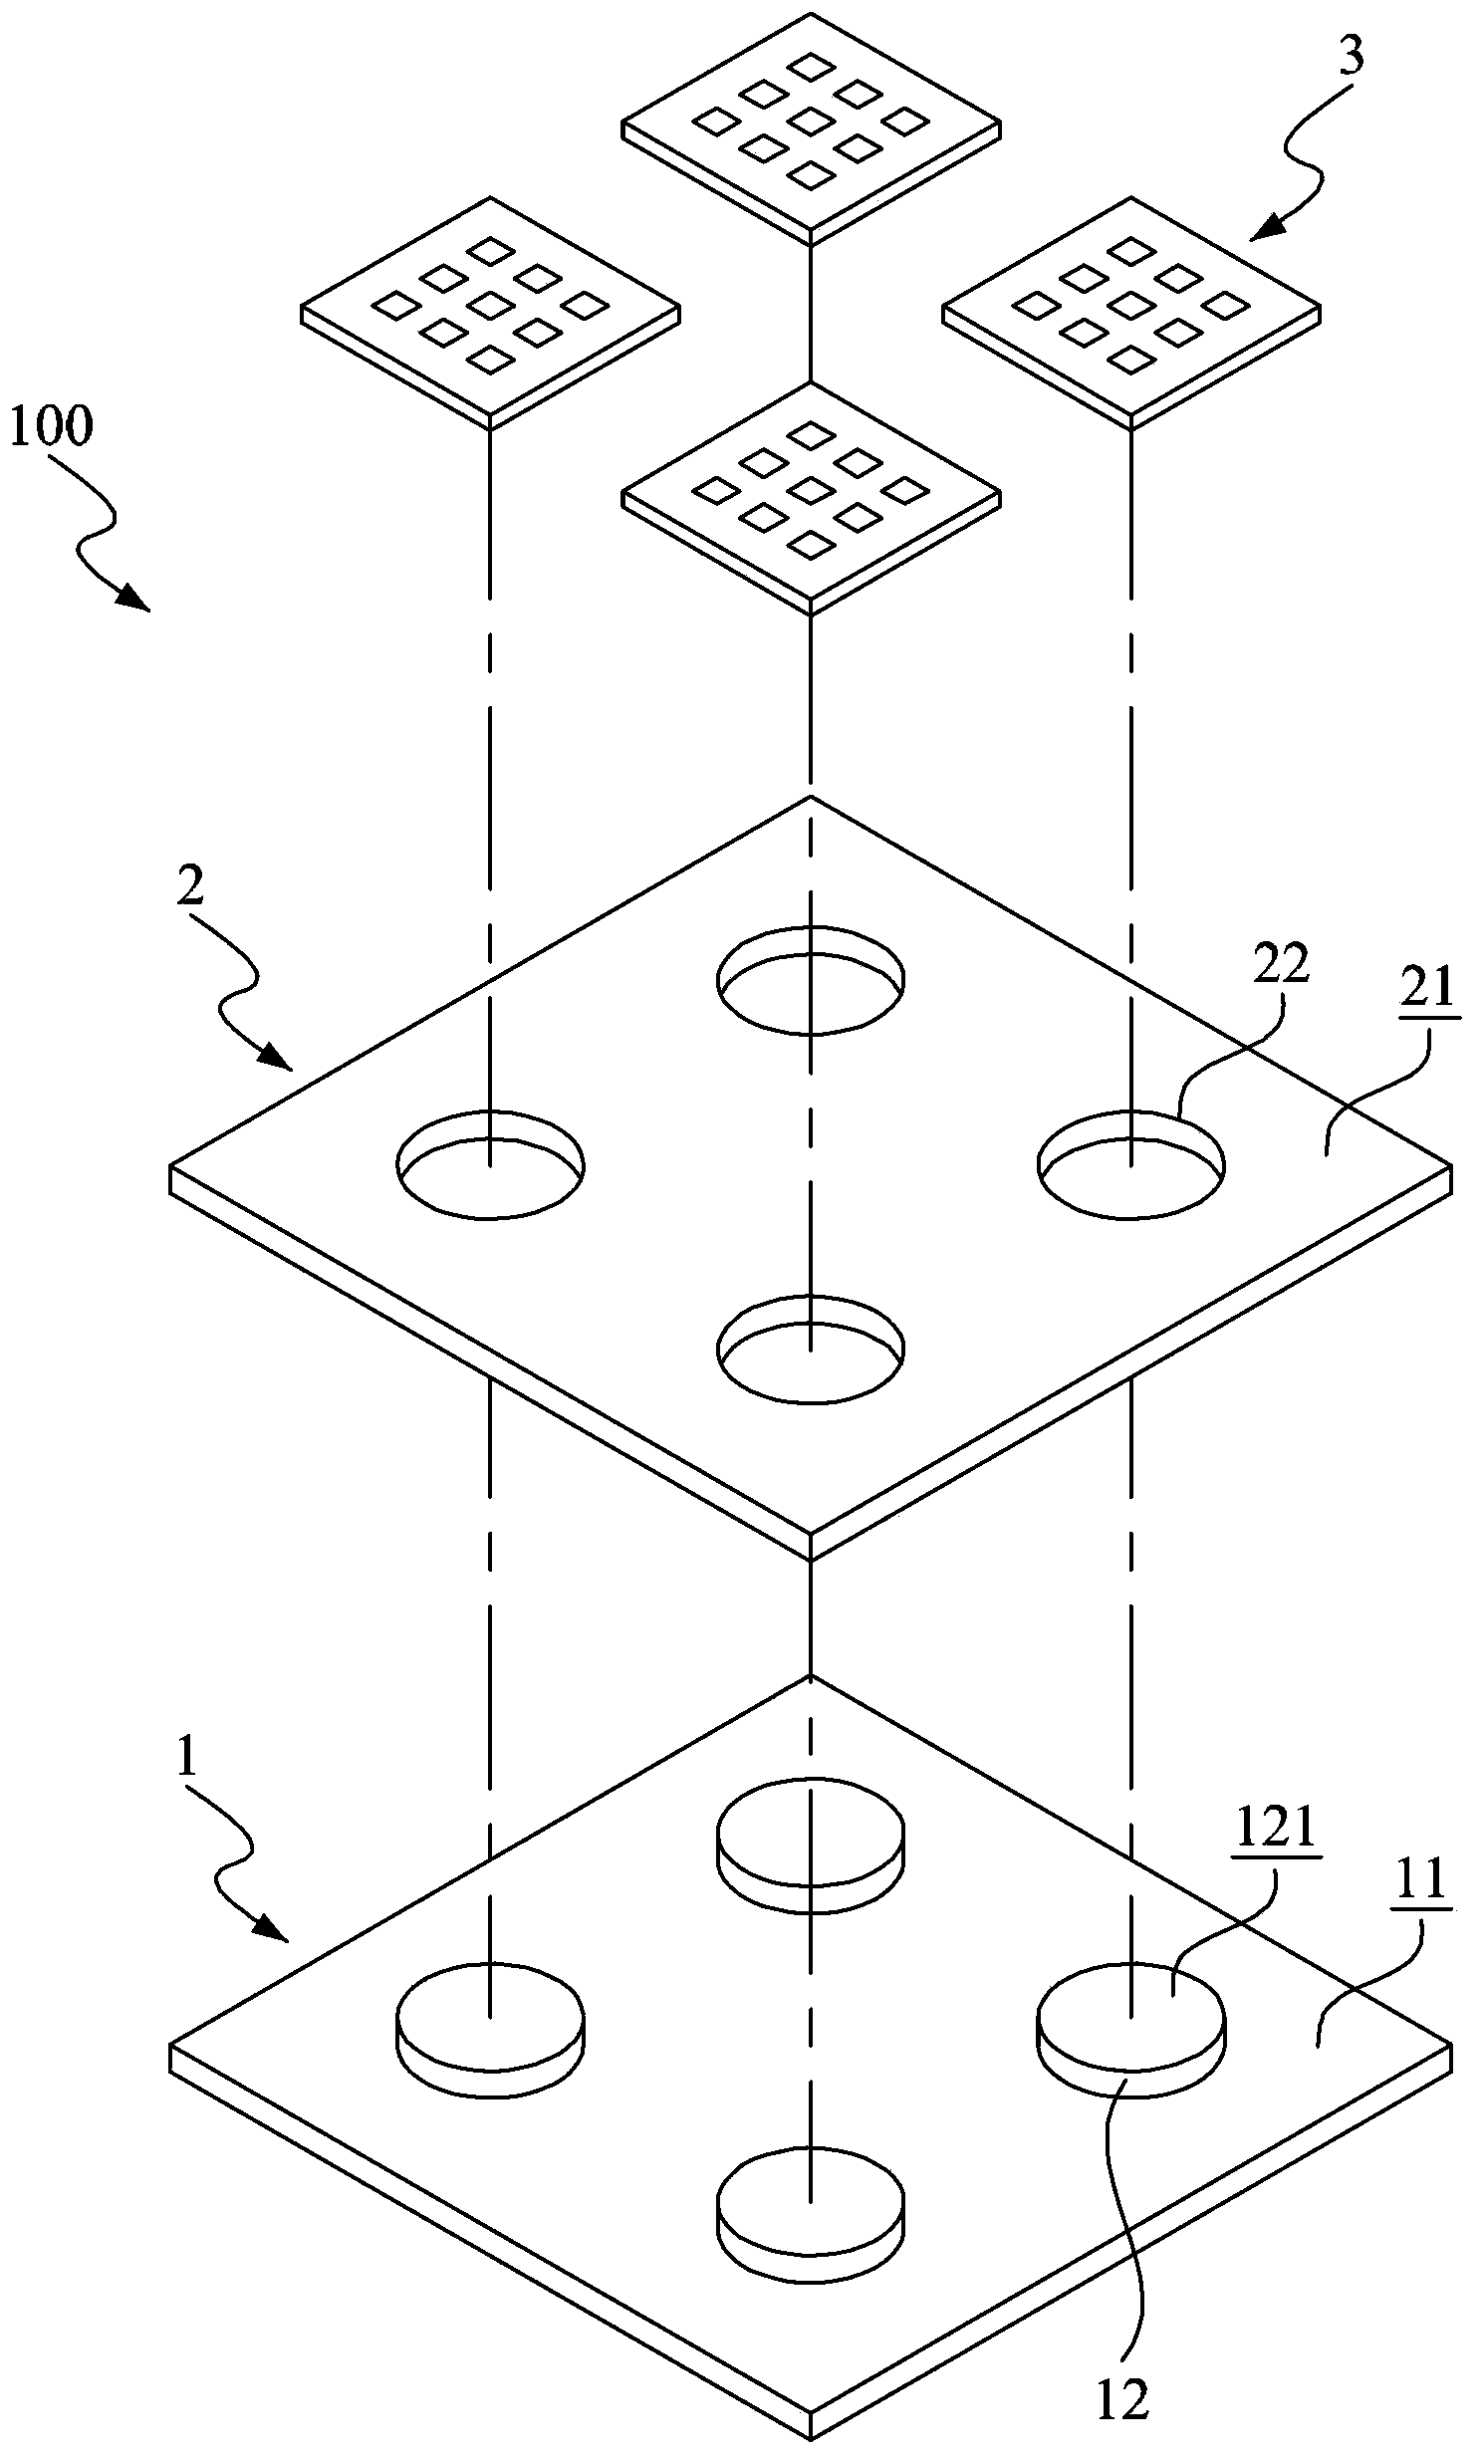 High heat conduction apparatus for multilayer circuit